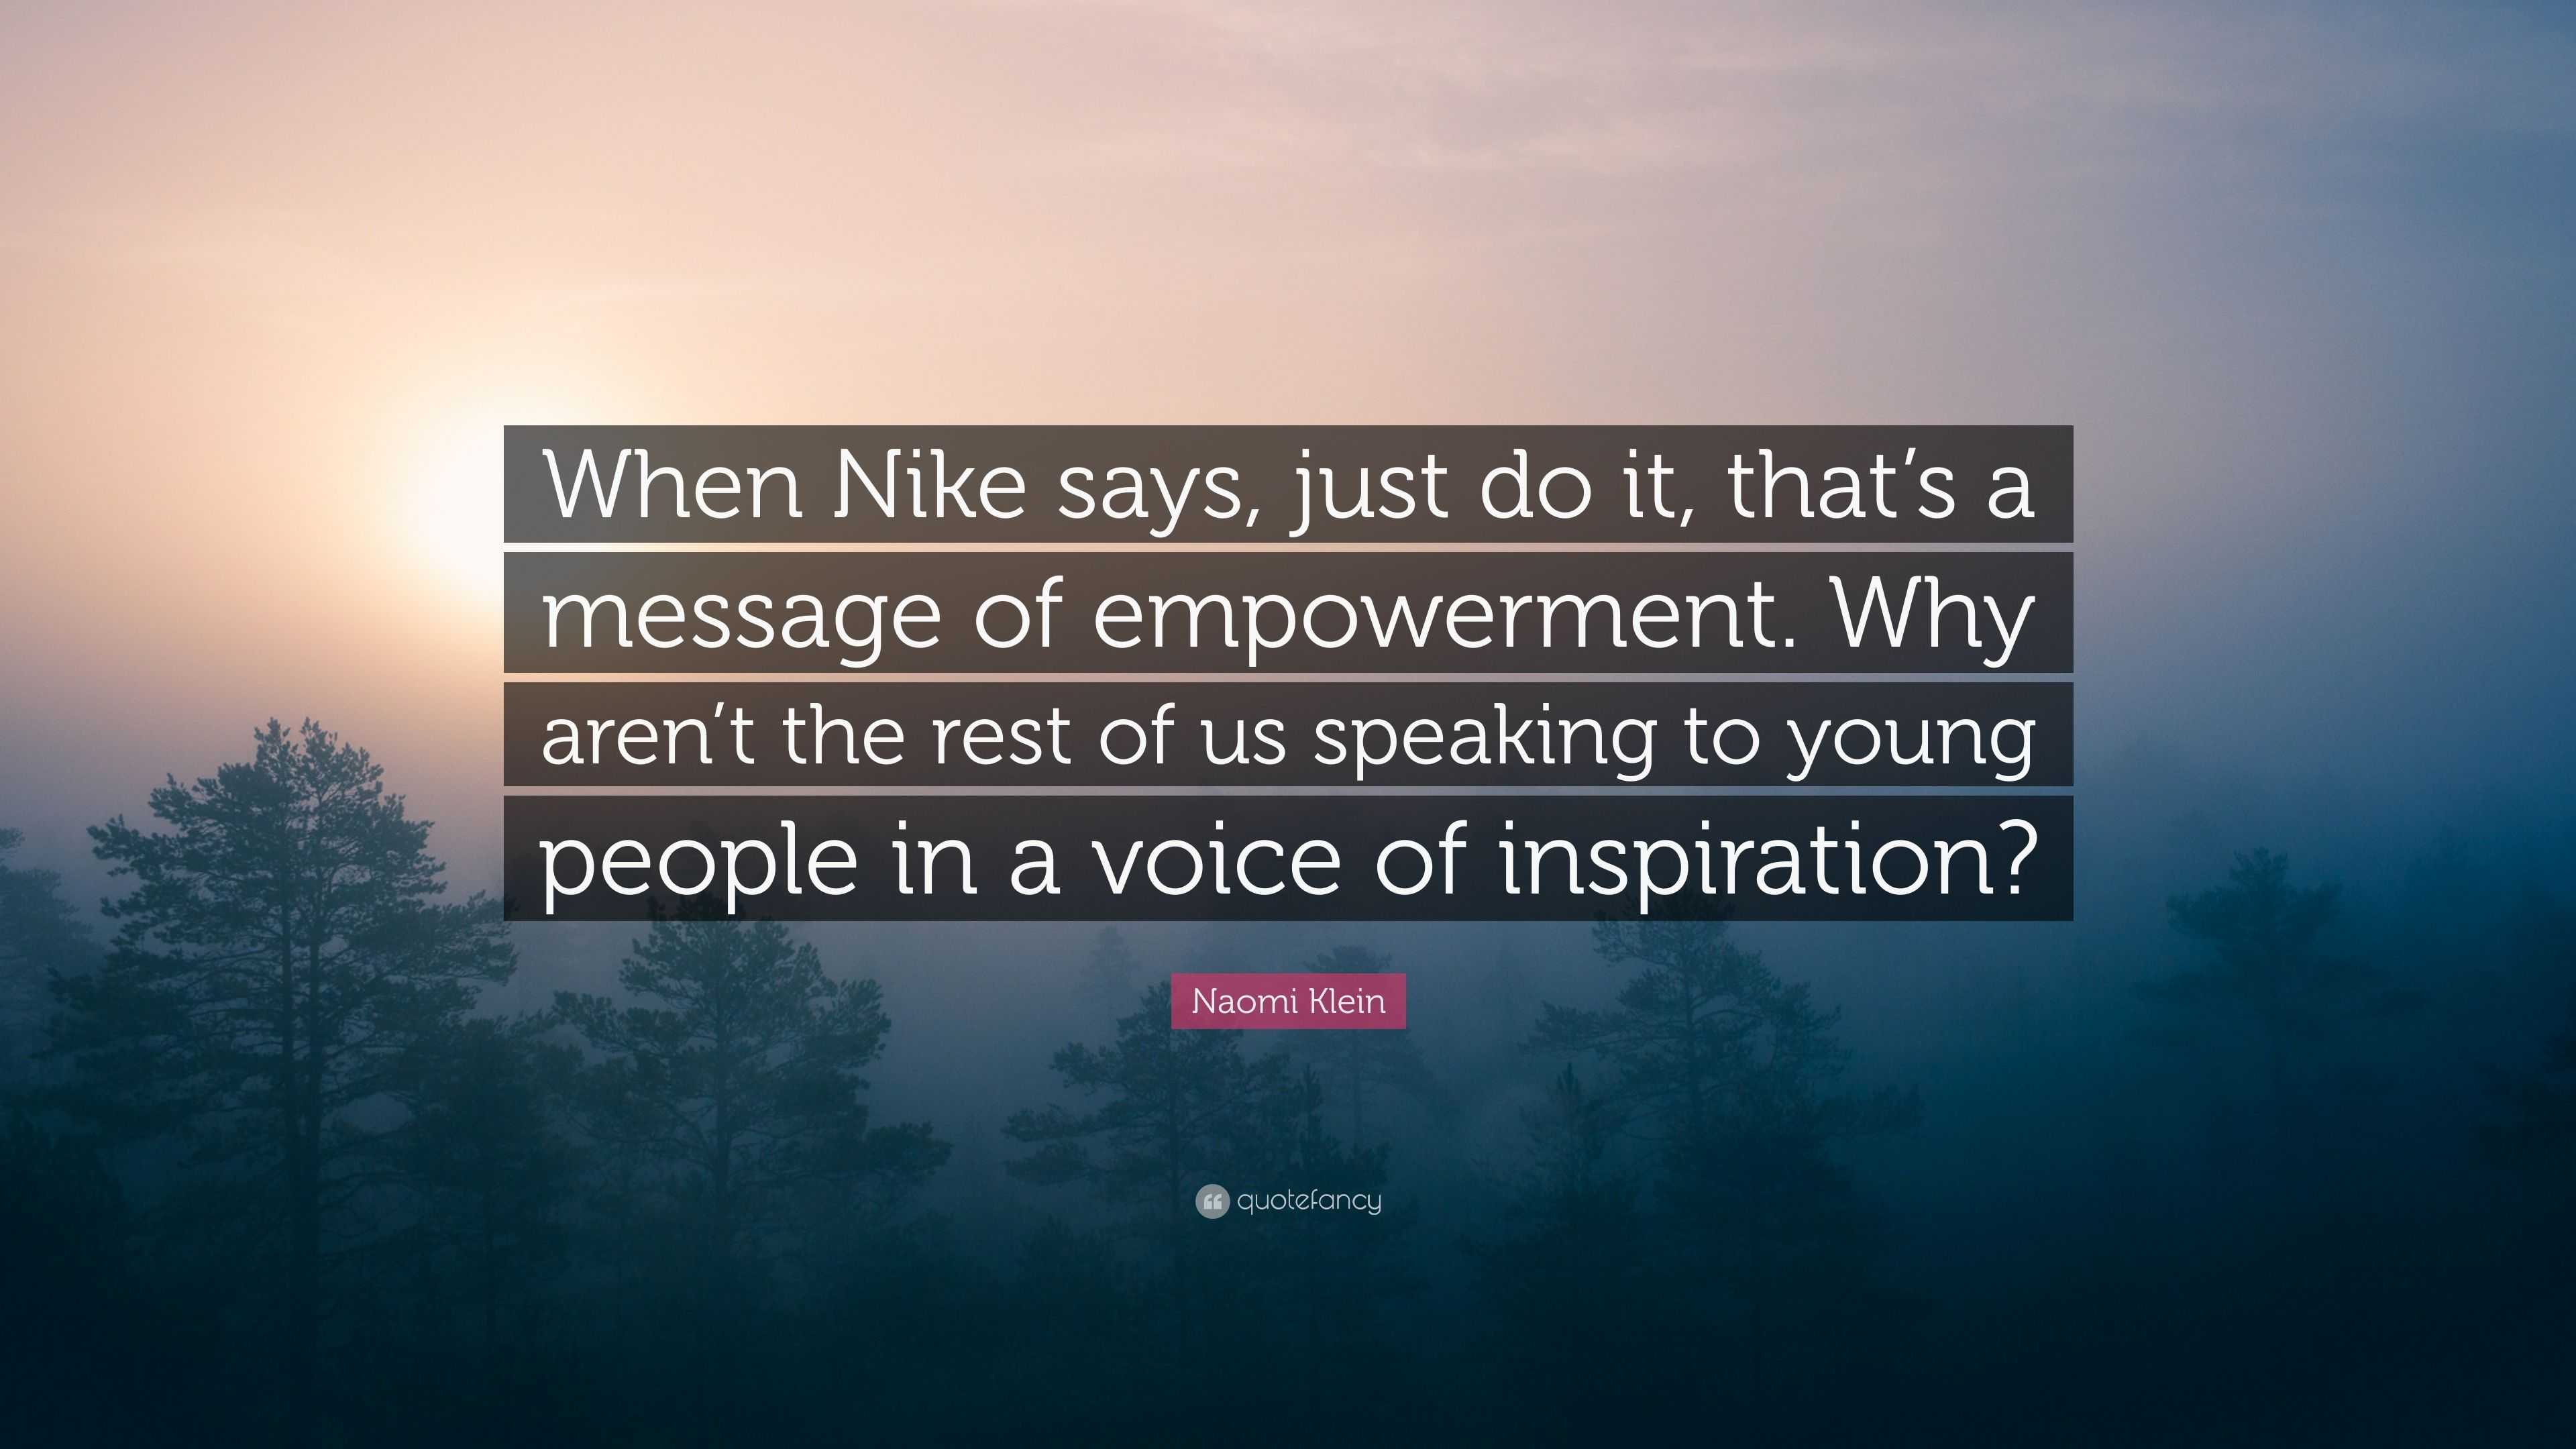 Naomi Klein Quote: "When Nike says, just do it, that's a message ...